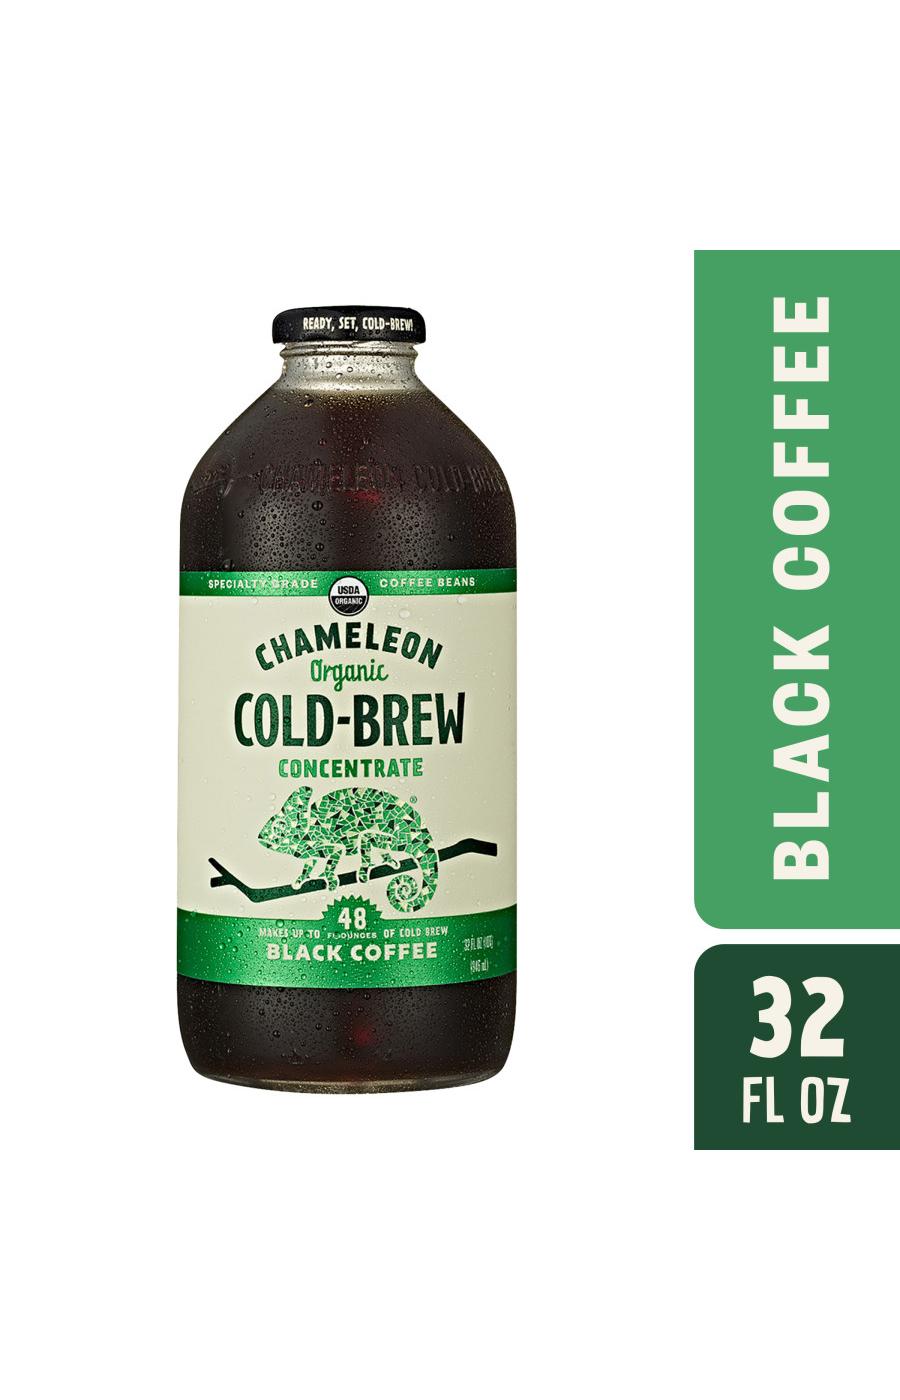 Chameleon Organic Cold Brew Concentrate Black Coffee; image 7 of 8